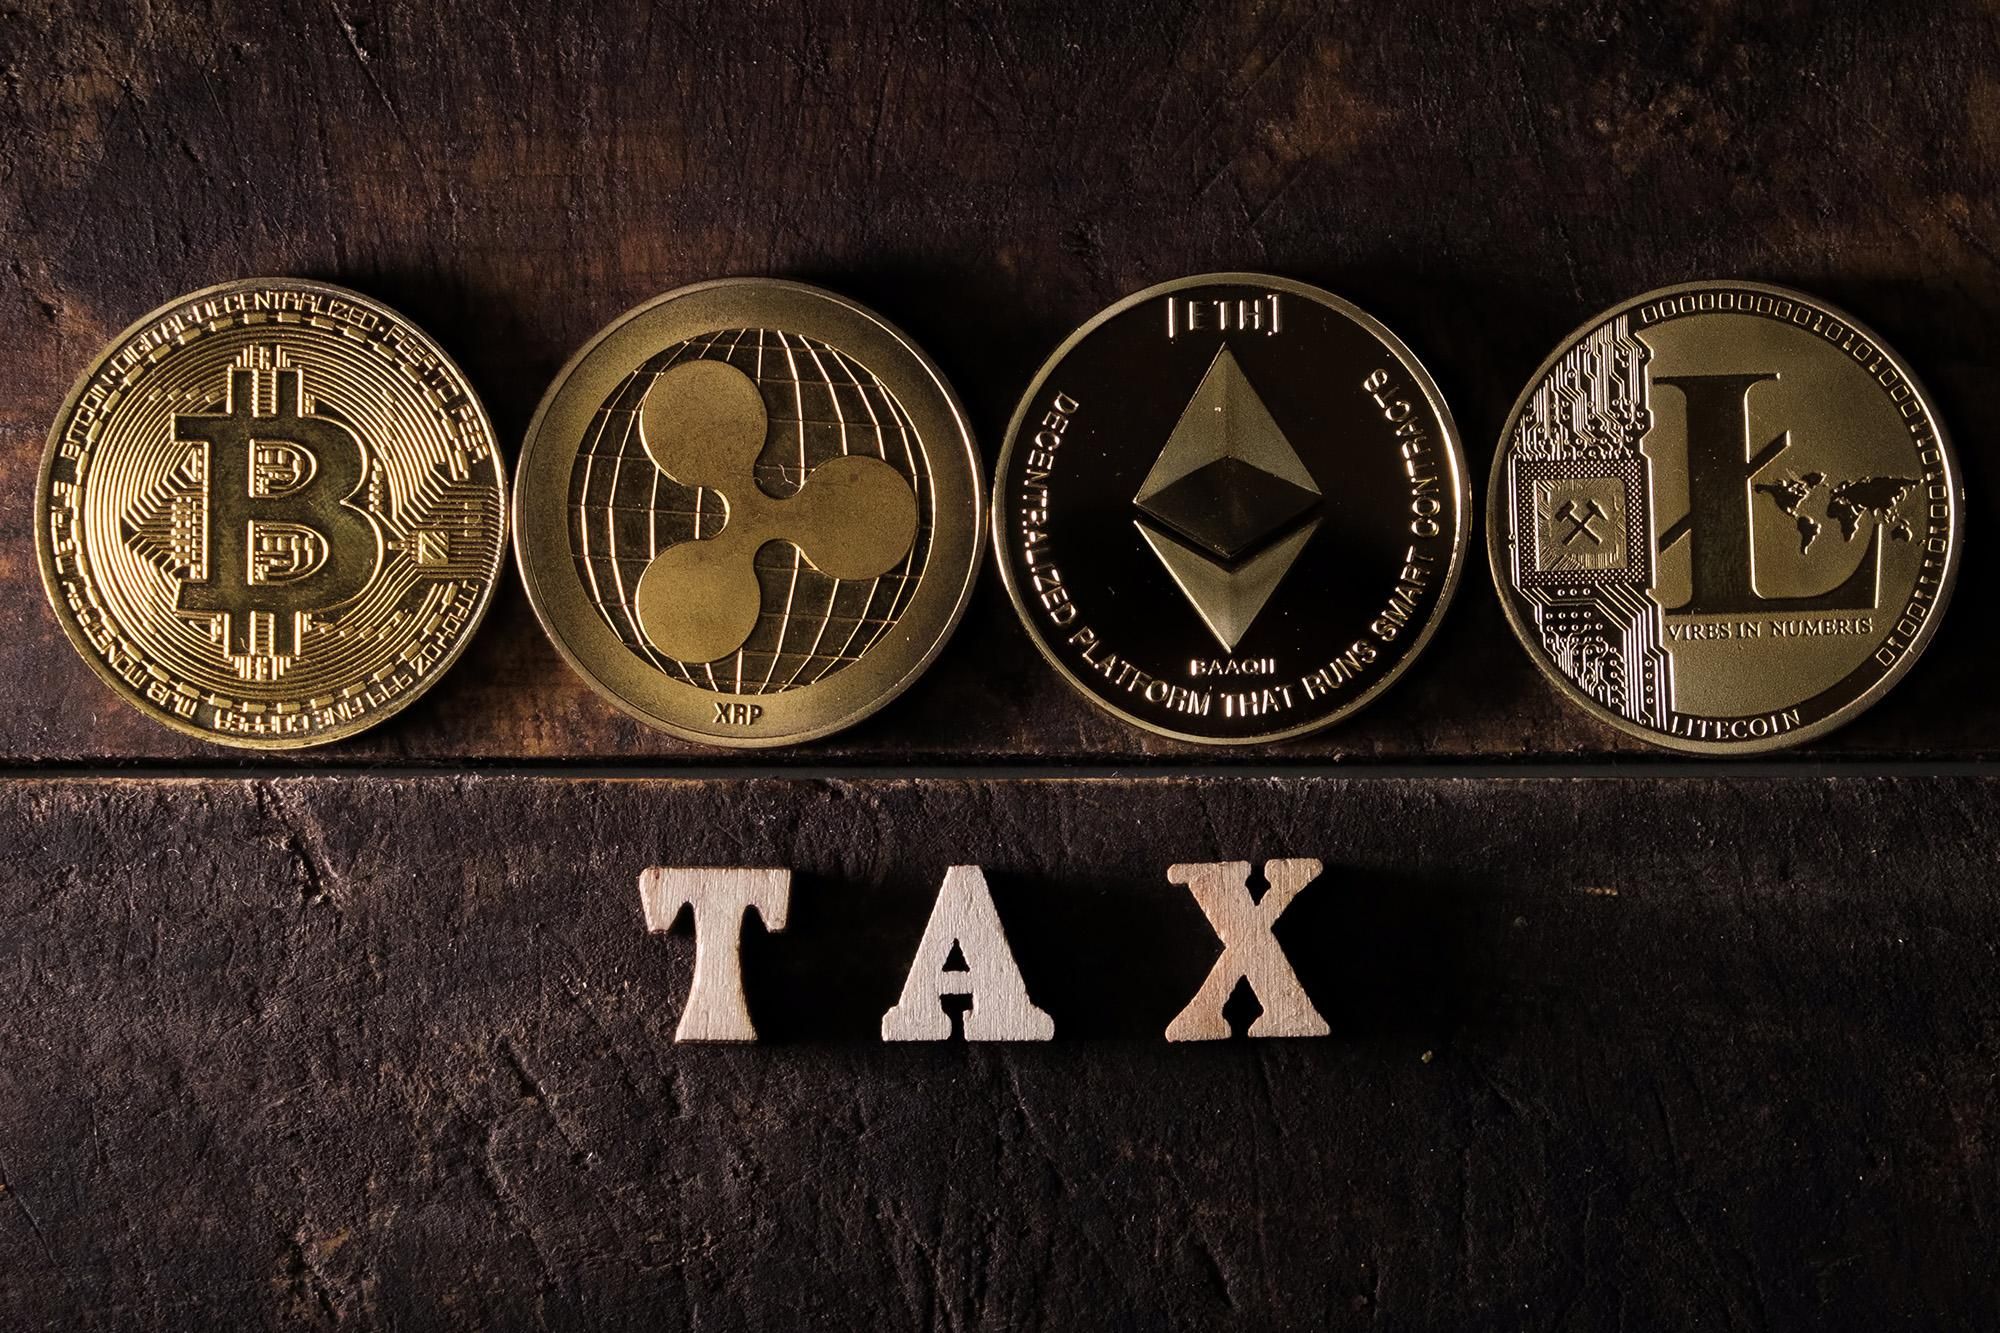 bitcoin, xrp, ethereum and litecoin in front of the word "tax"